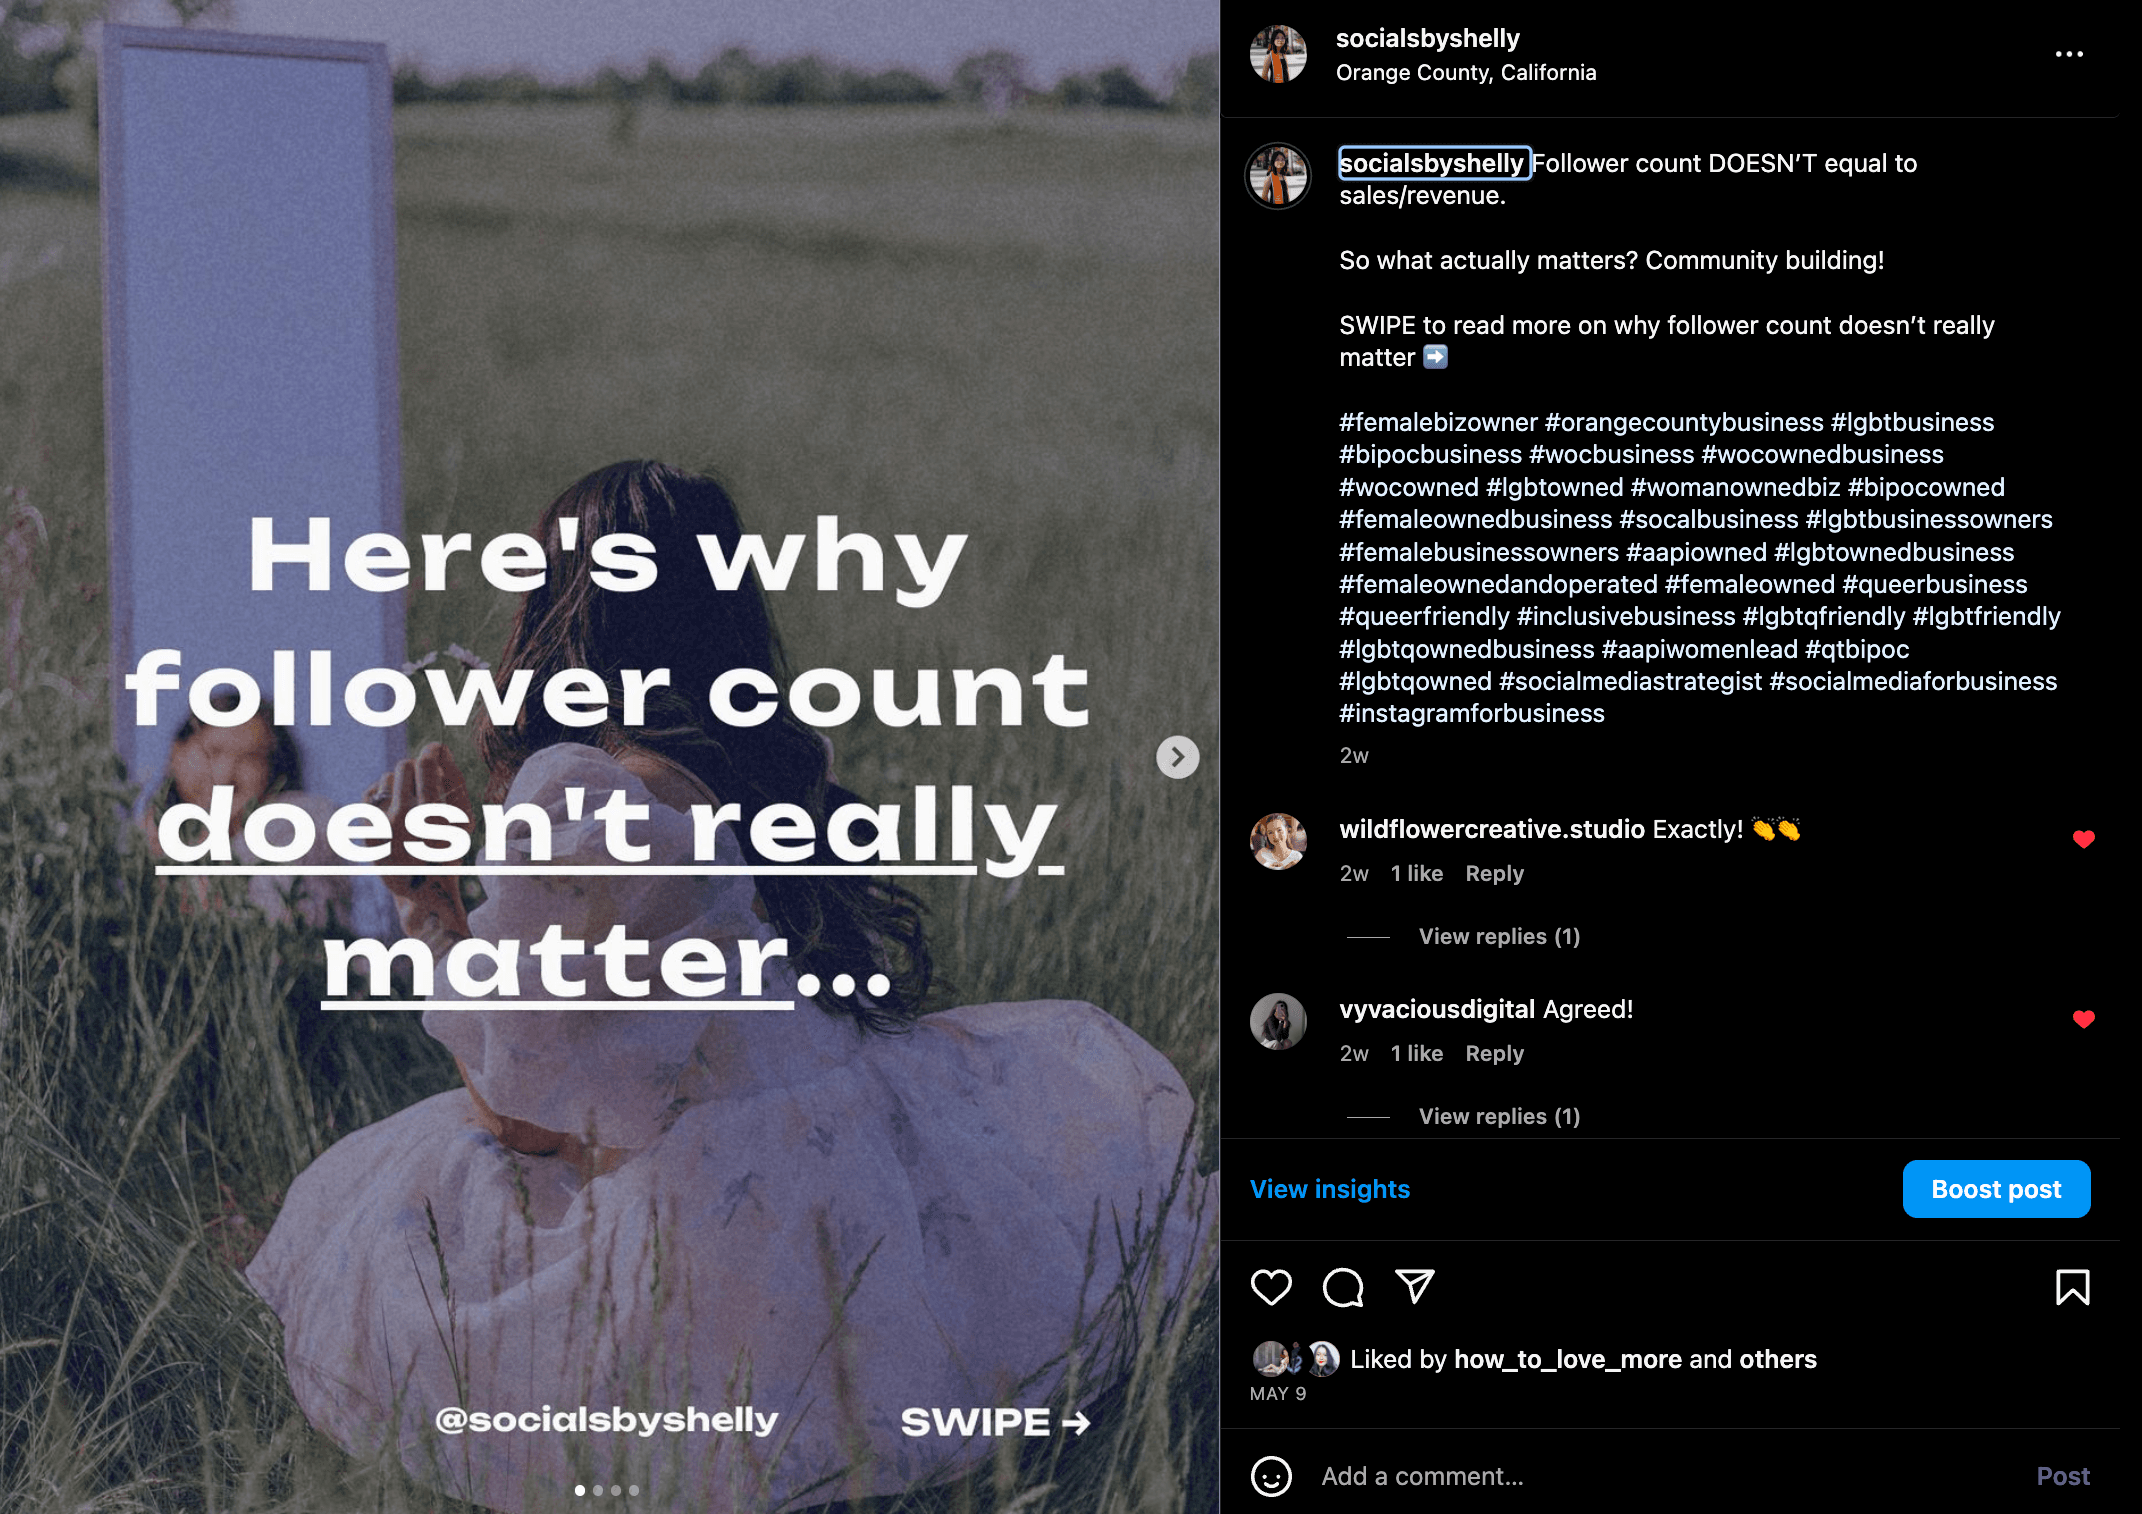 Socials by Shelly Instagram post: HERE'S WHY FOLLOWER COUNT DOESN'T REALLY MATTER...